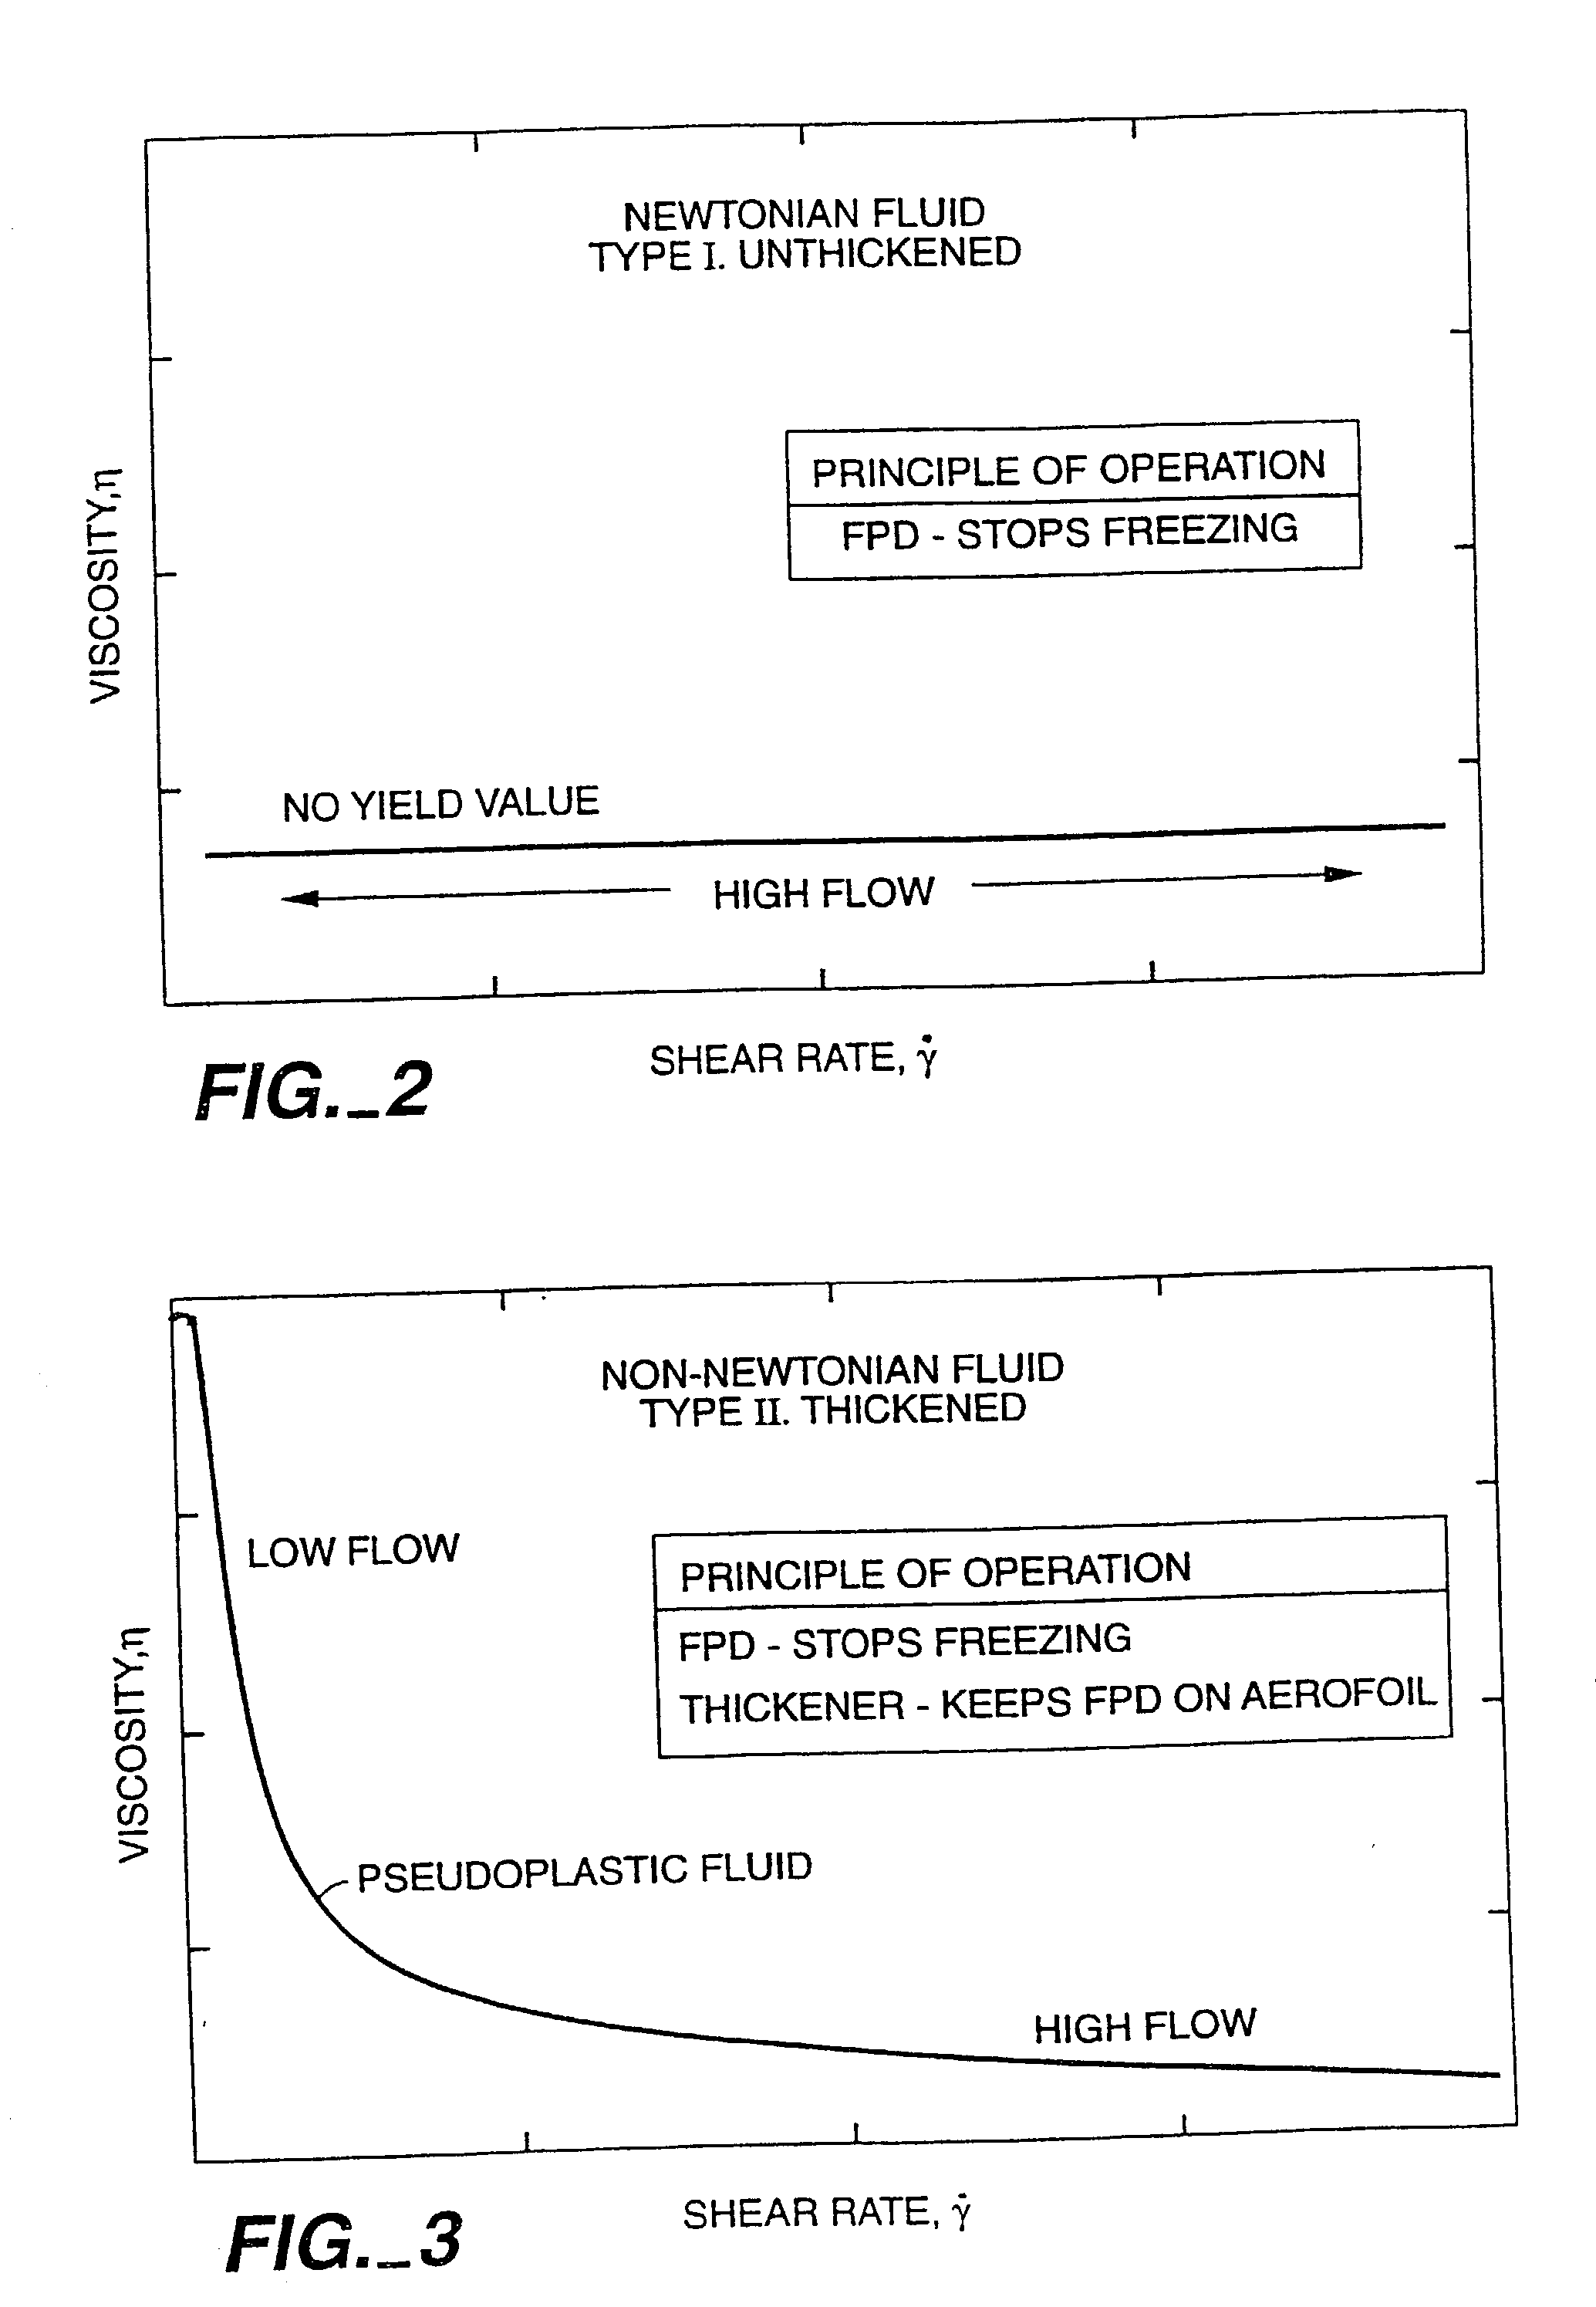 Environmentally friendly compositions having anti-icing, deicing or graffiti prevention properties